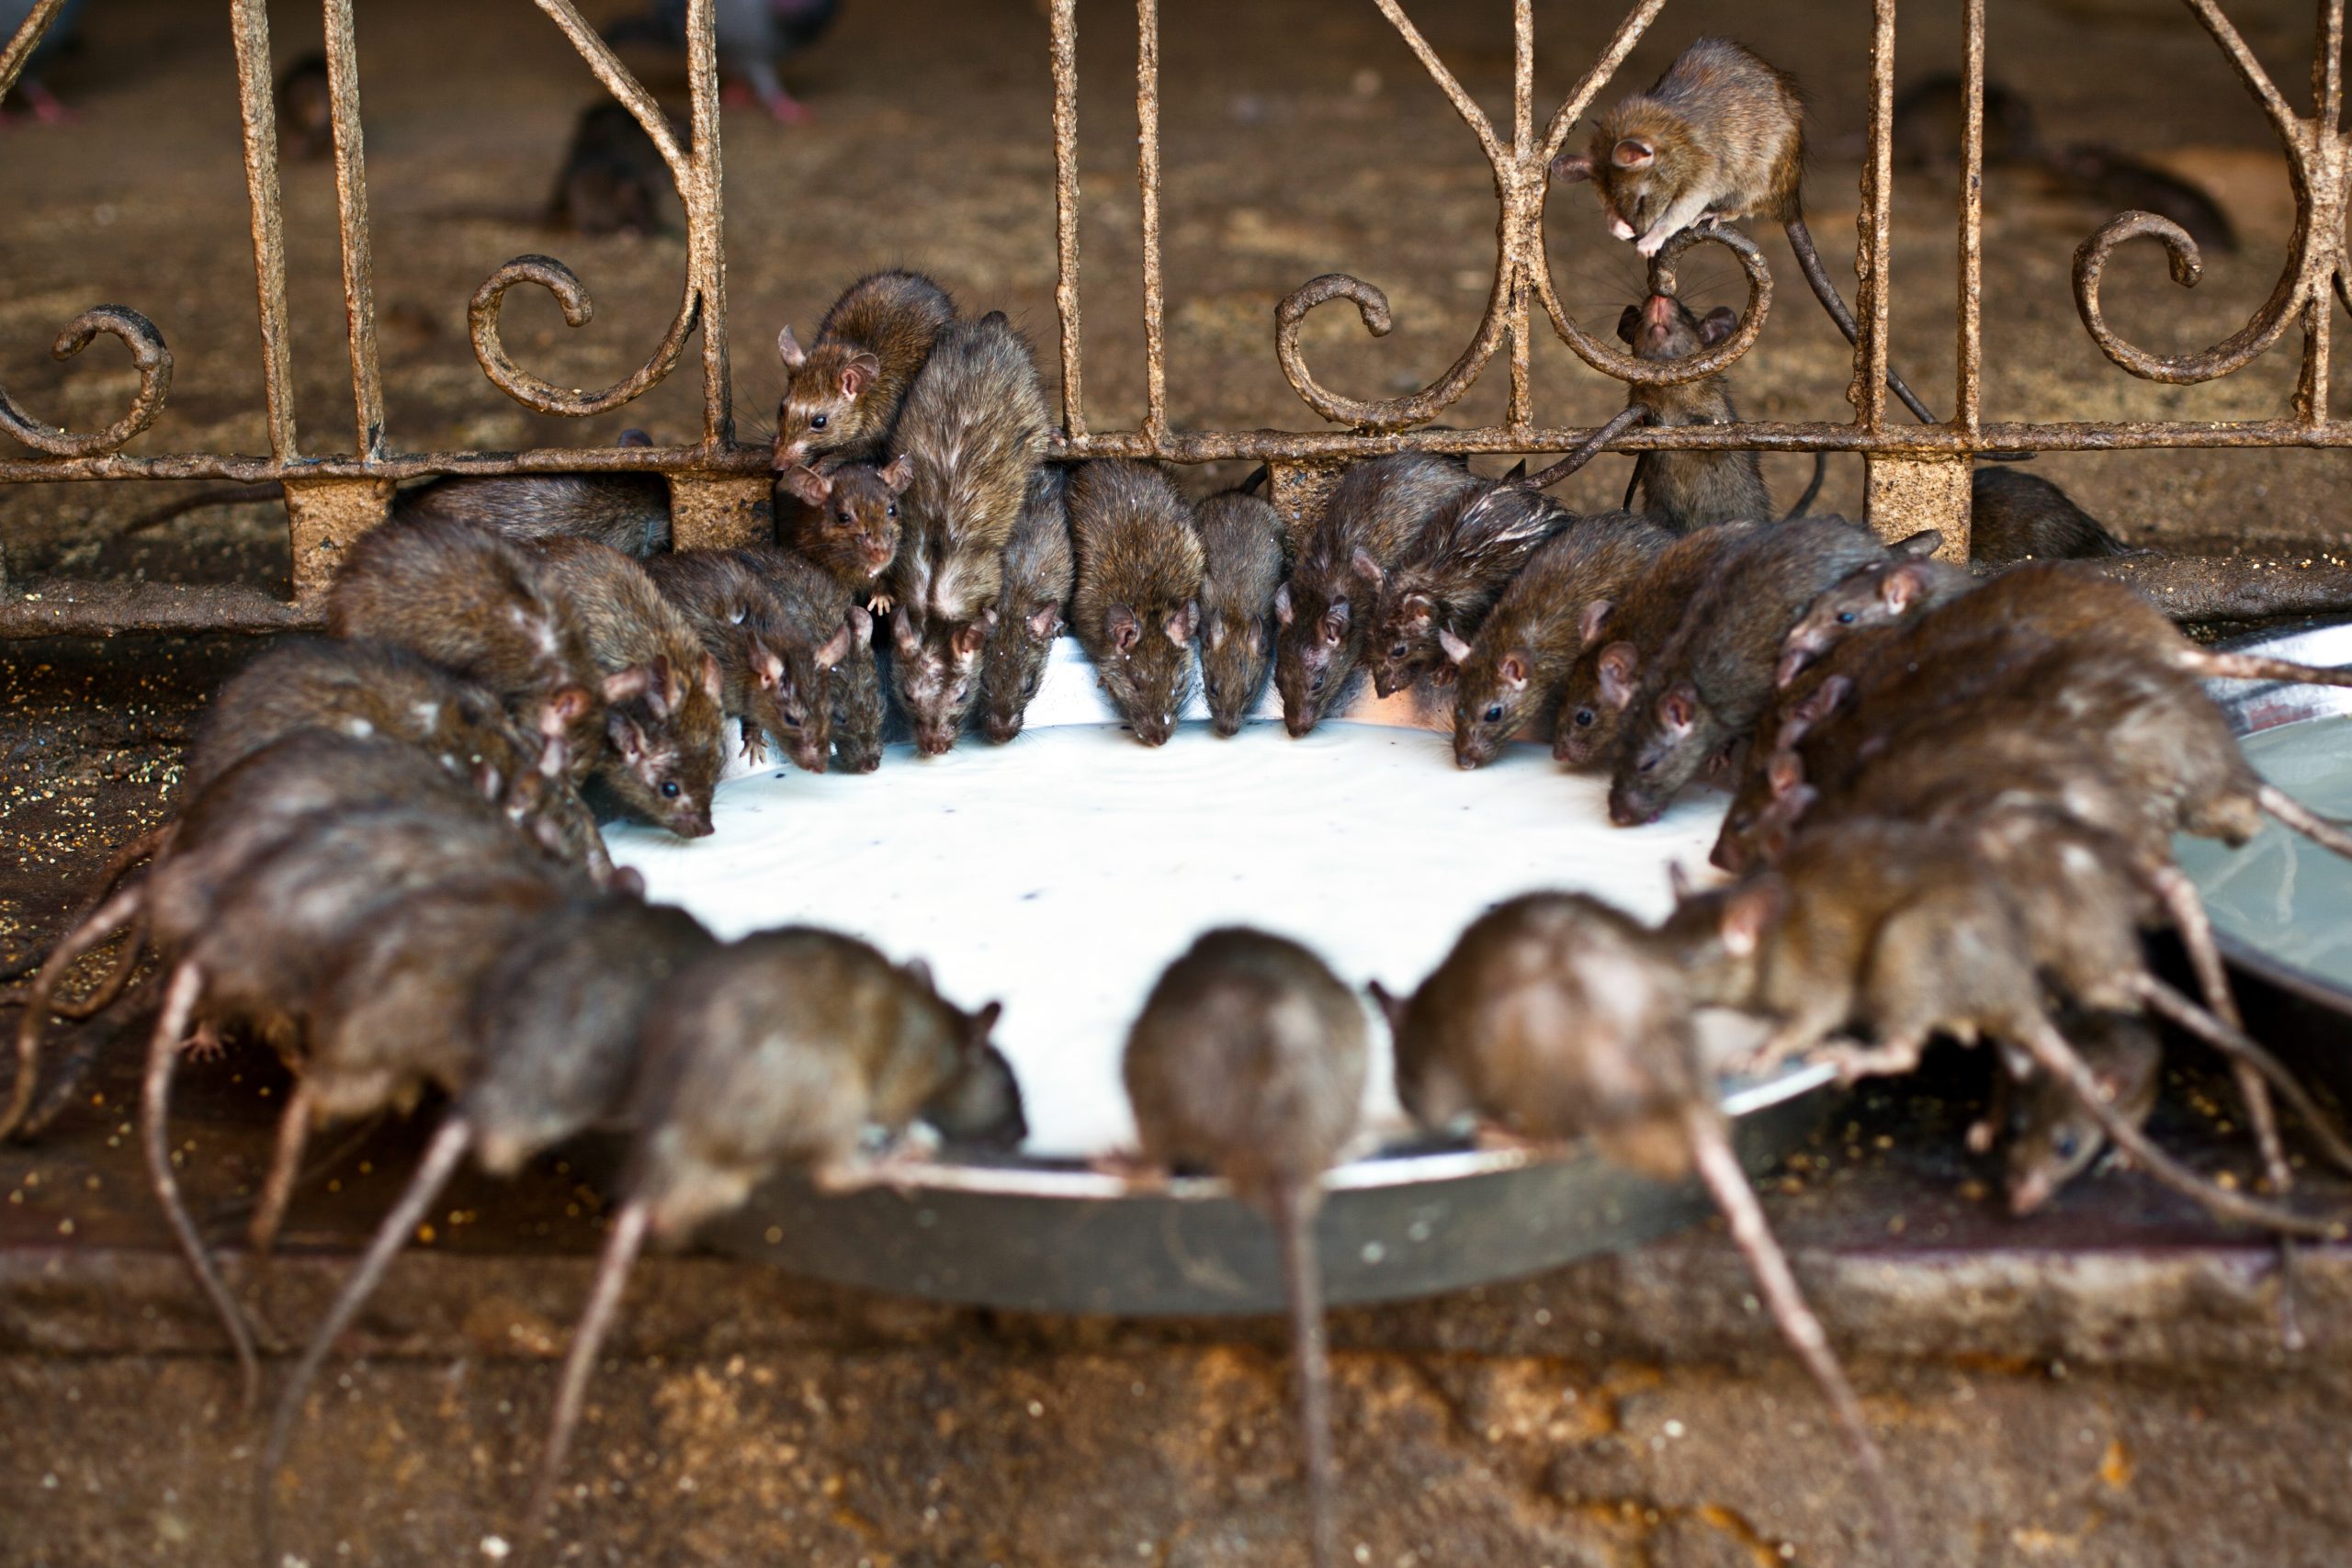 Temple of Rats